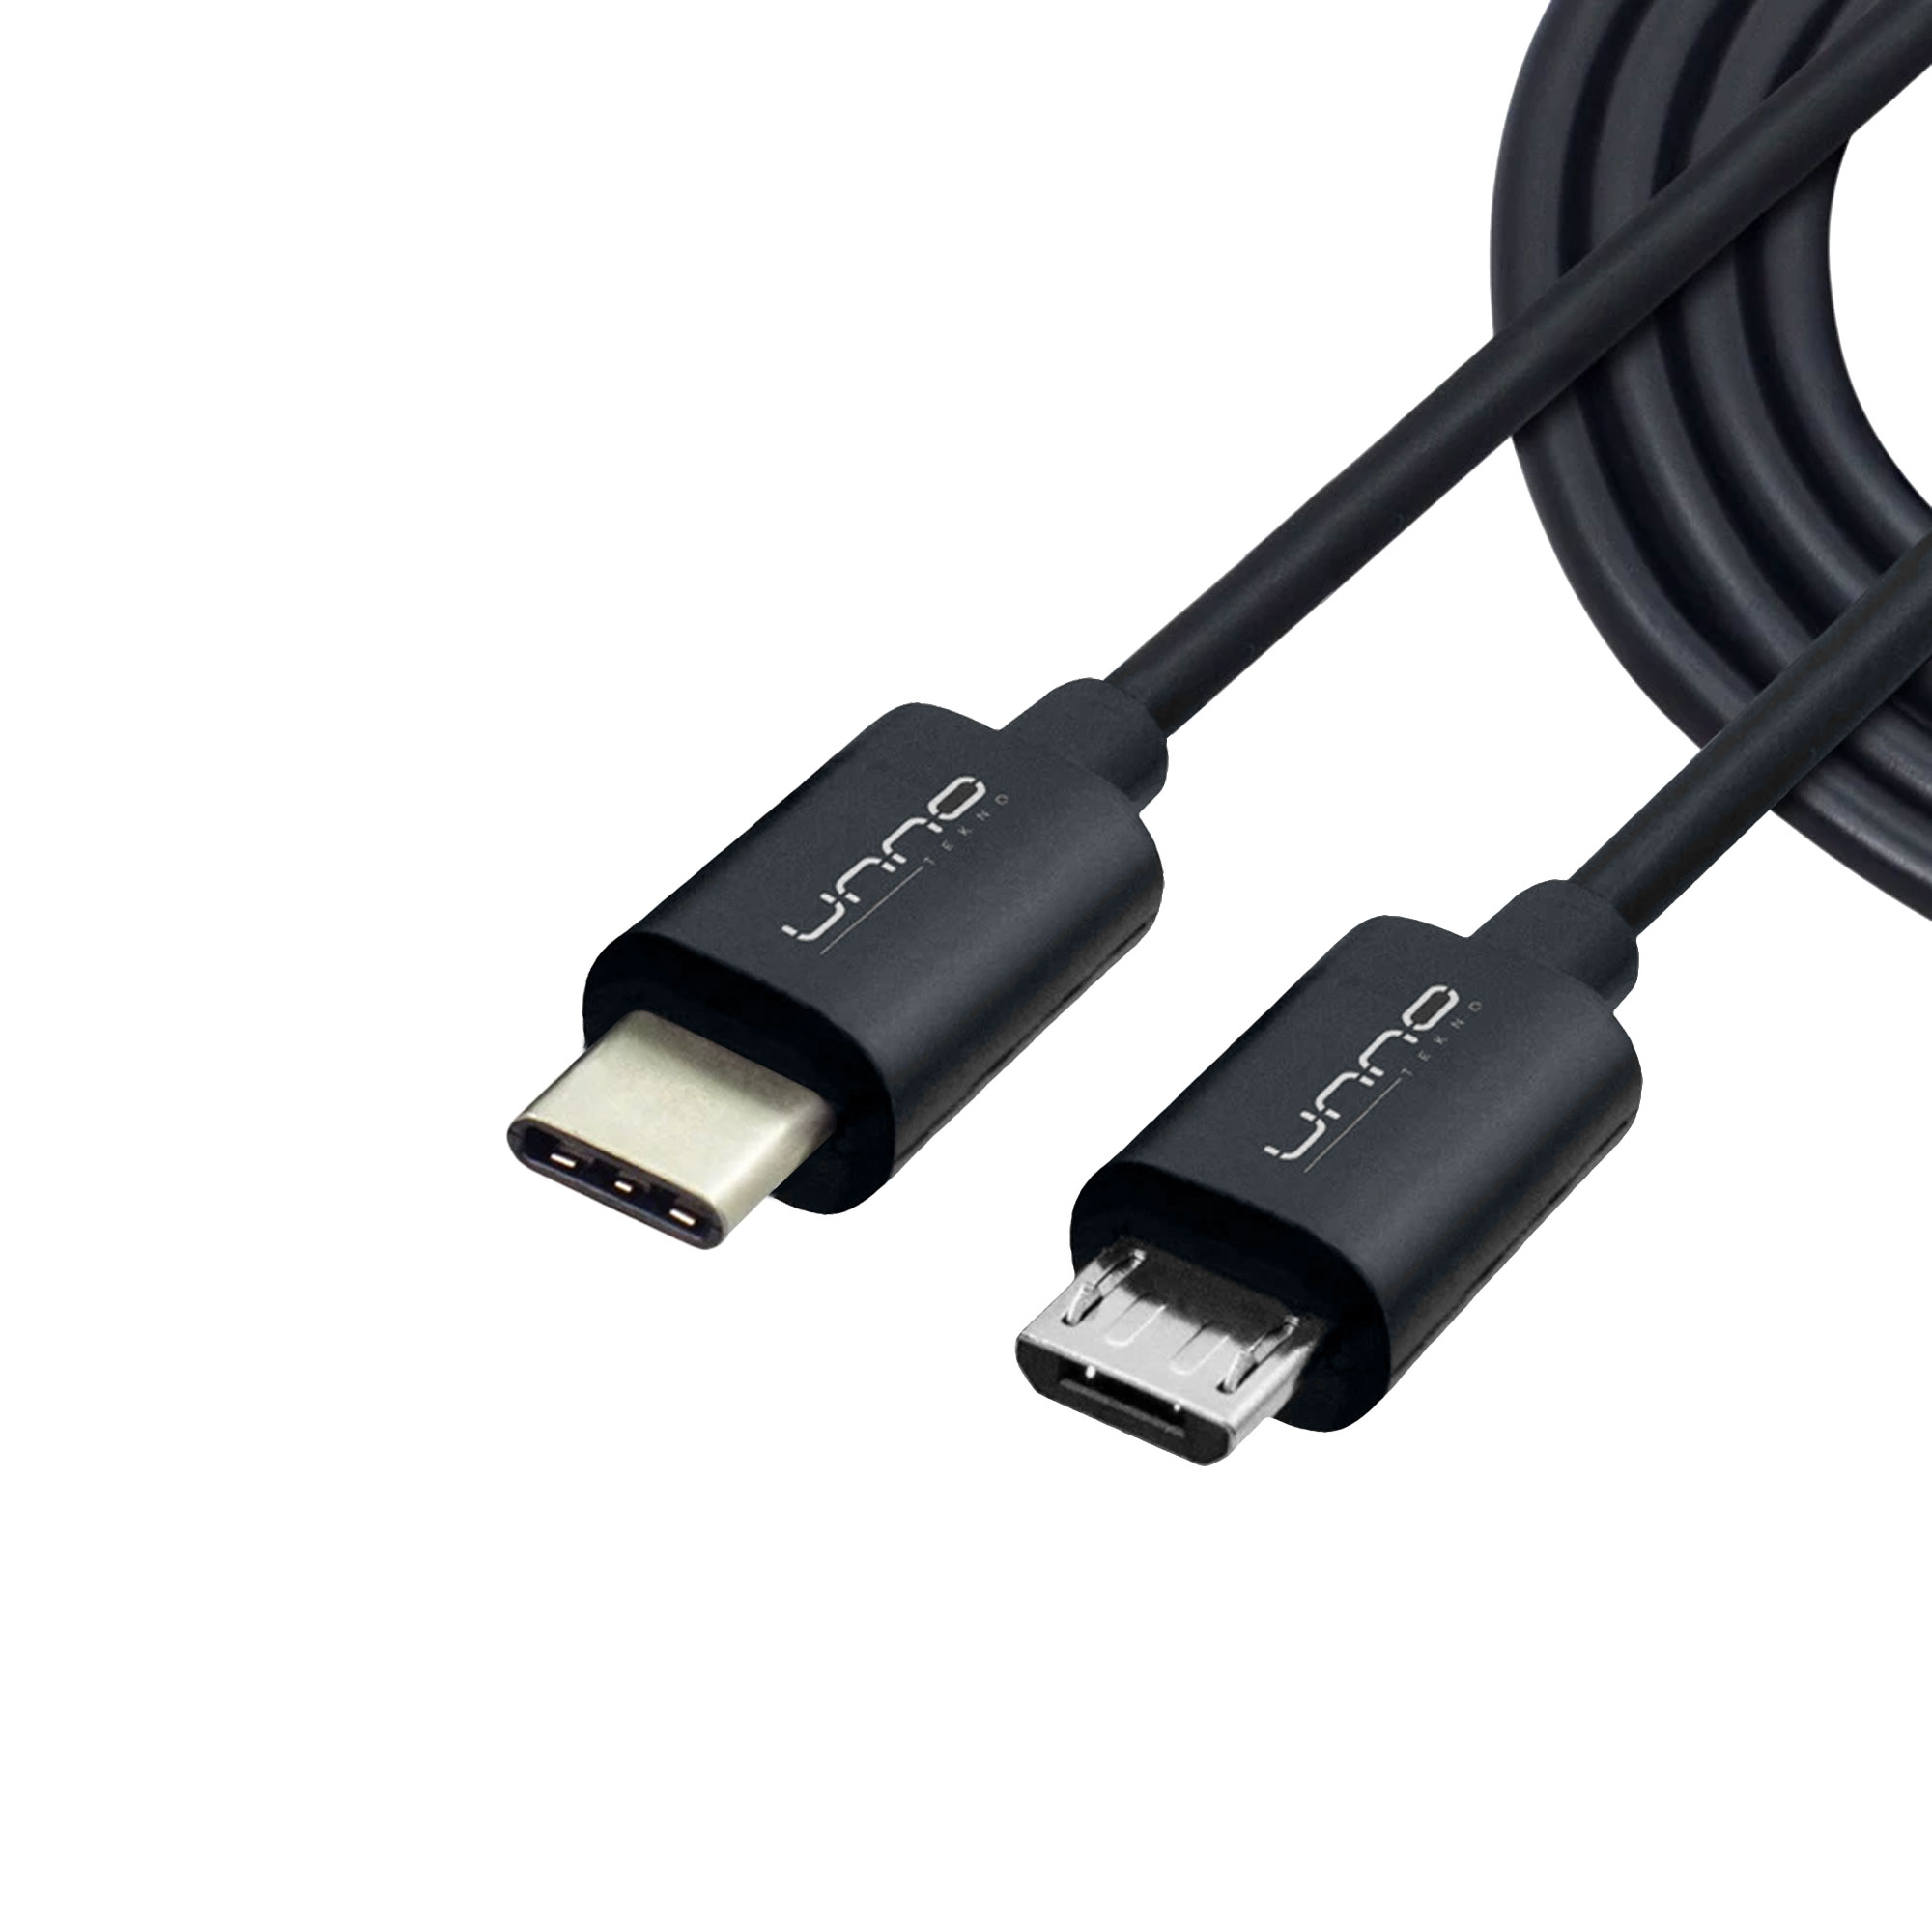 CABLE USB C A MICRO USB A, 5 FT CB4058BK